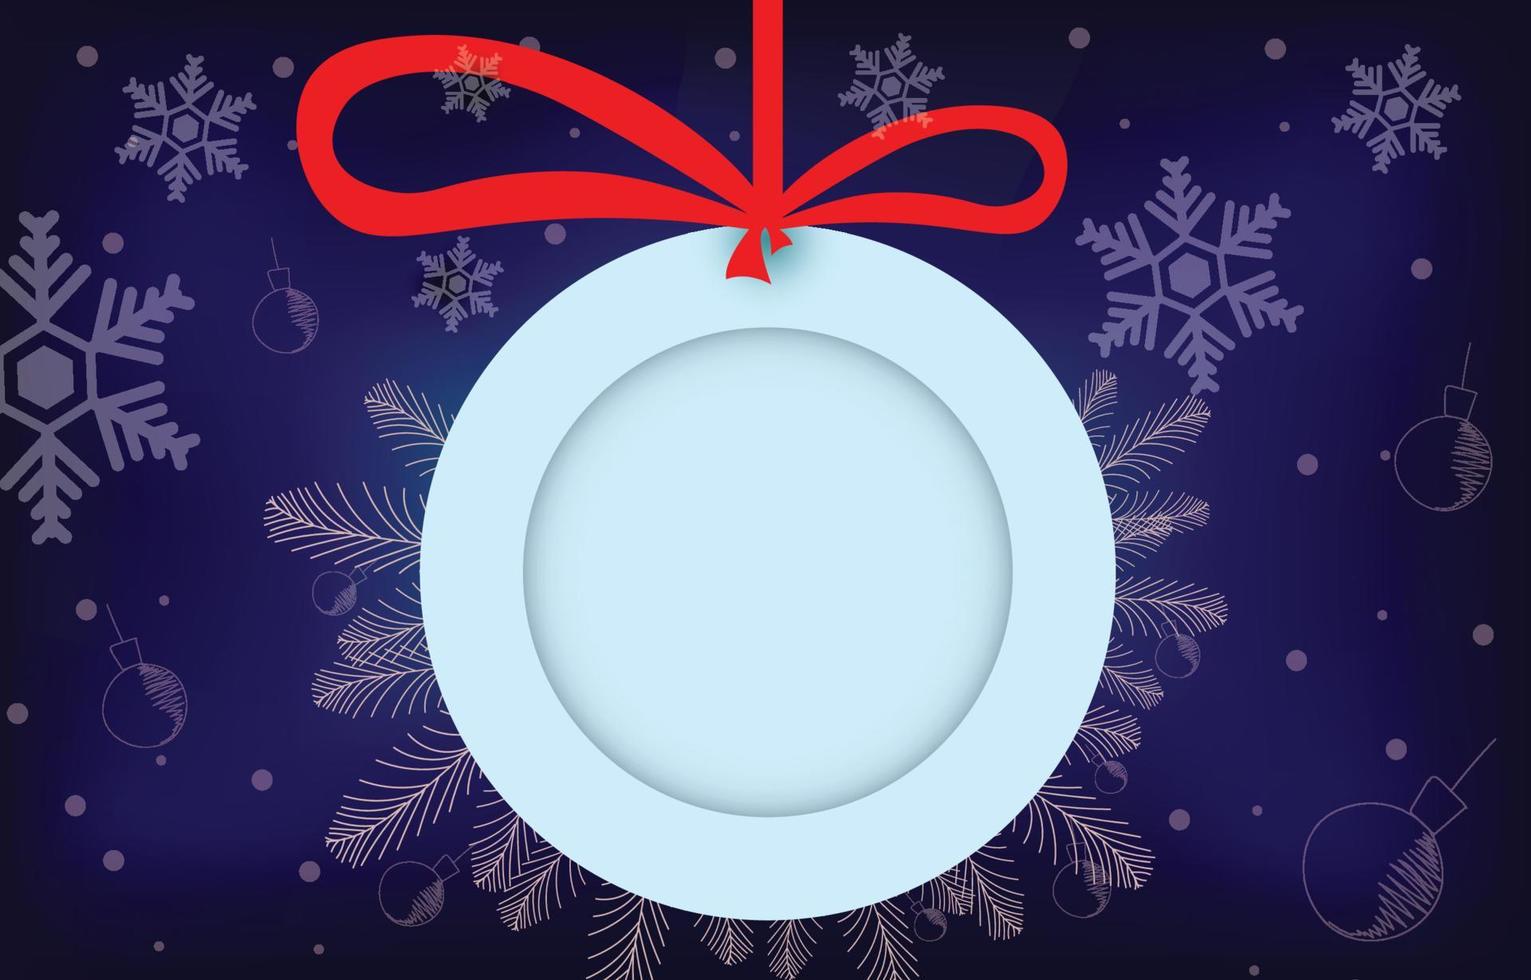 Circle hang tag with decoration items merry christmas and happy new year. background with blank frame decorated, vector illustration of winter